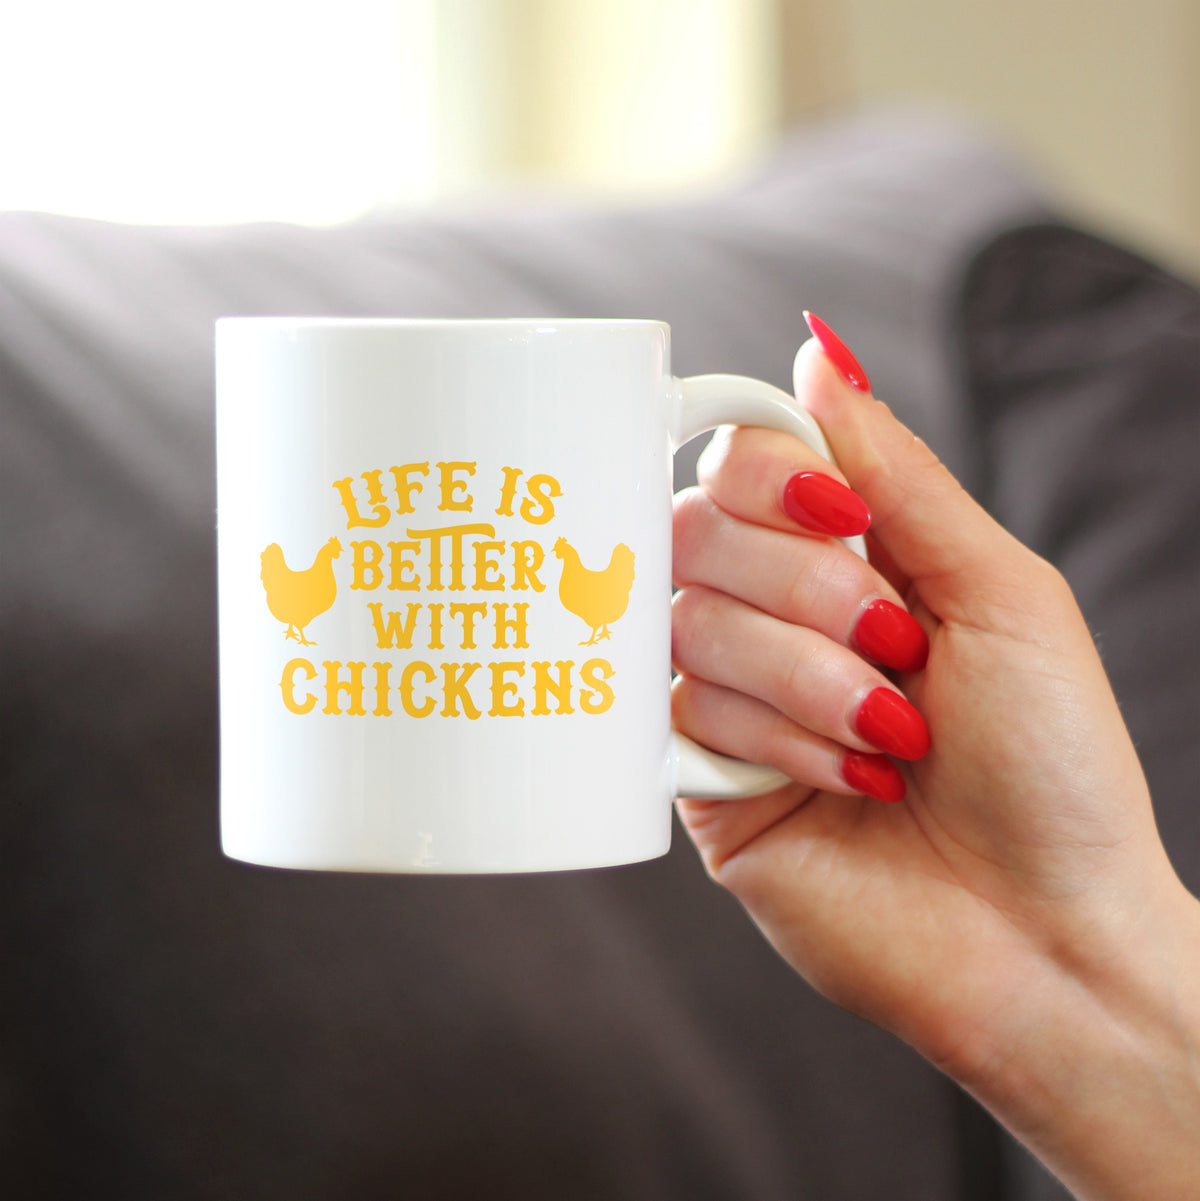 Life is Better with Chickens - Funny Coffee Mug - Chicken Themed Decor &amp; Mama Hen Gifts for Women